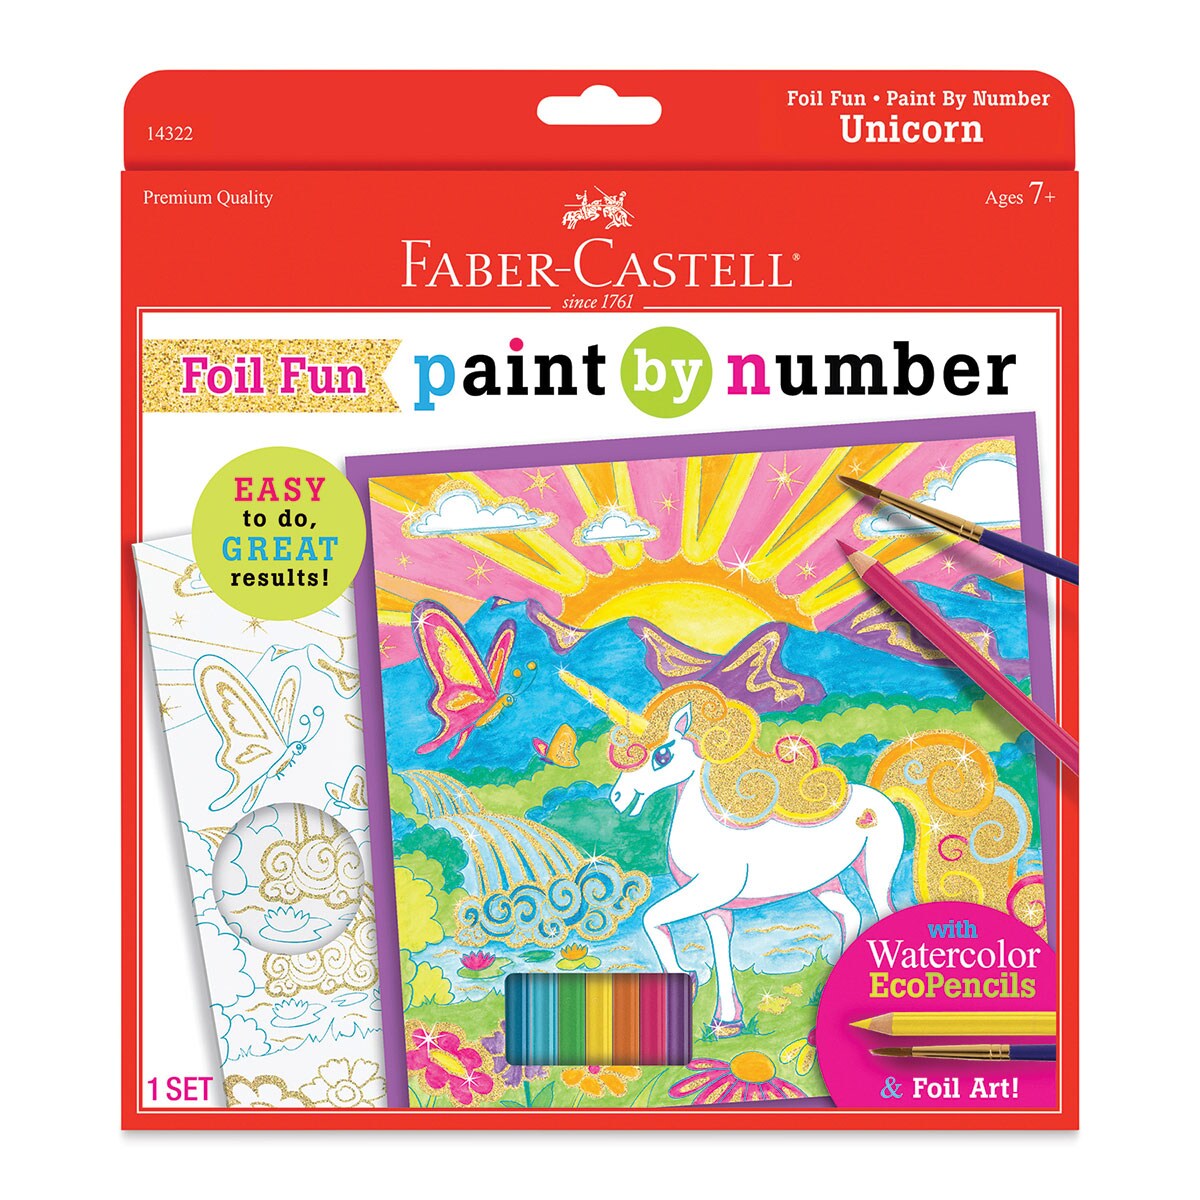 Faber-Castell Color By Number Set - Unicorn Fun